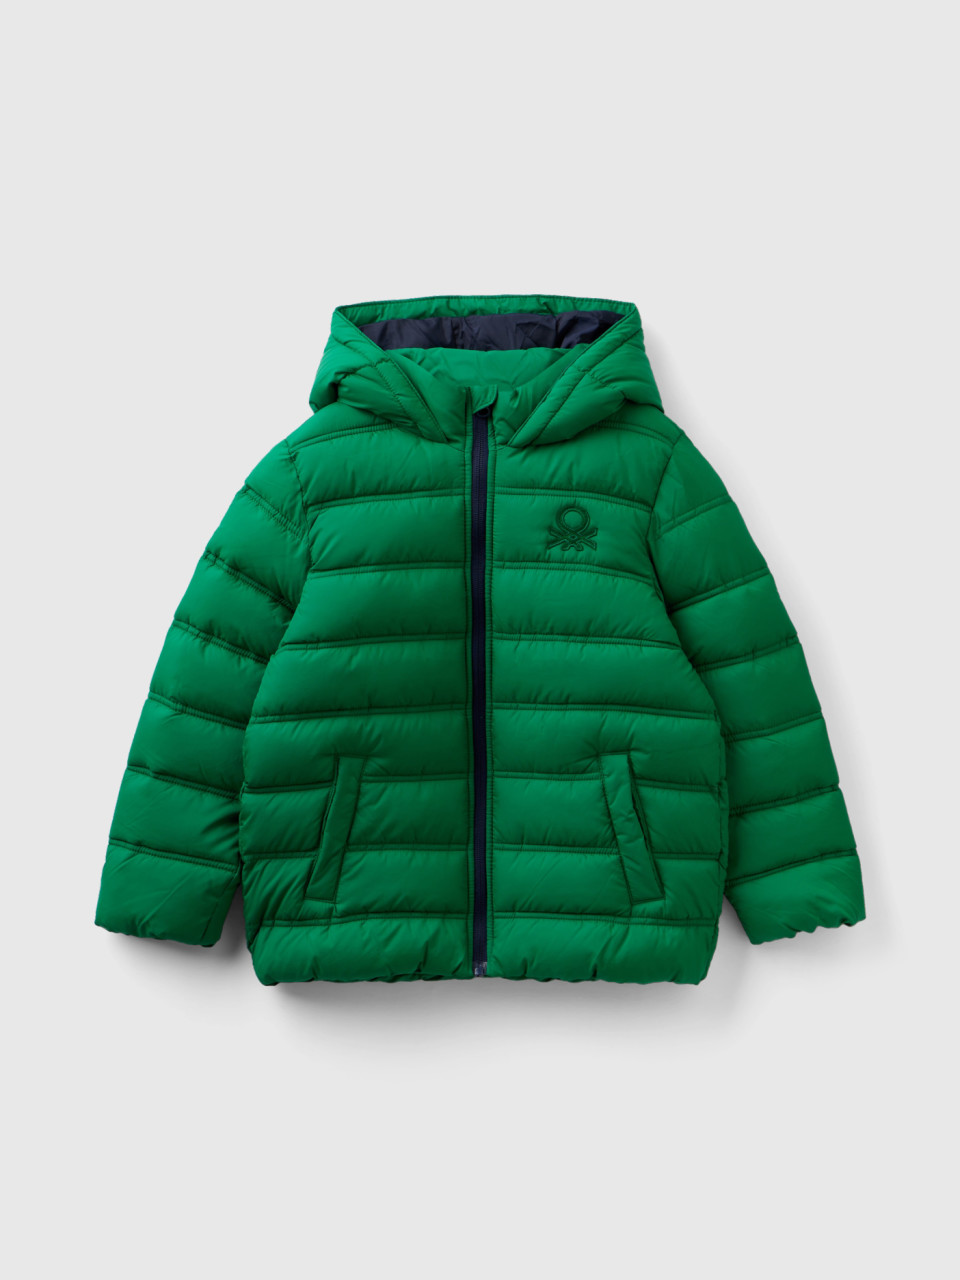 Benetton, Puffer Jacket With Hood And Logo, Green, Kids